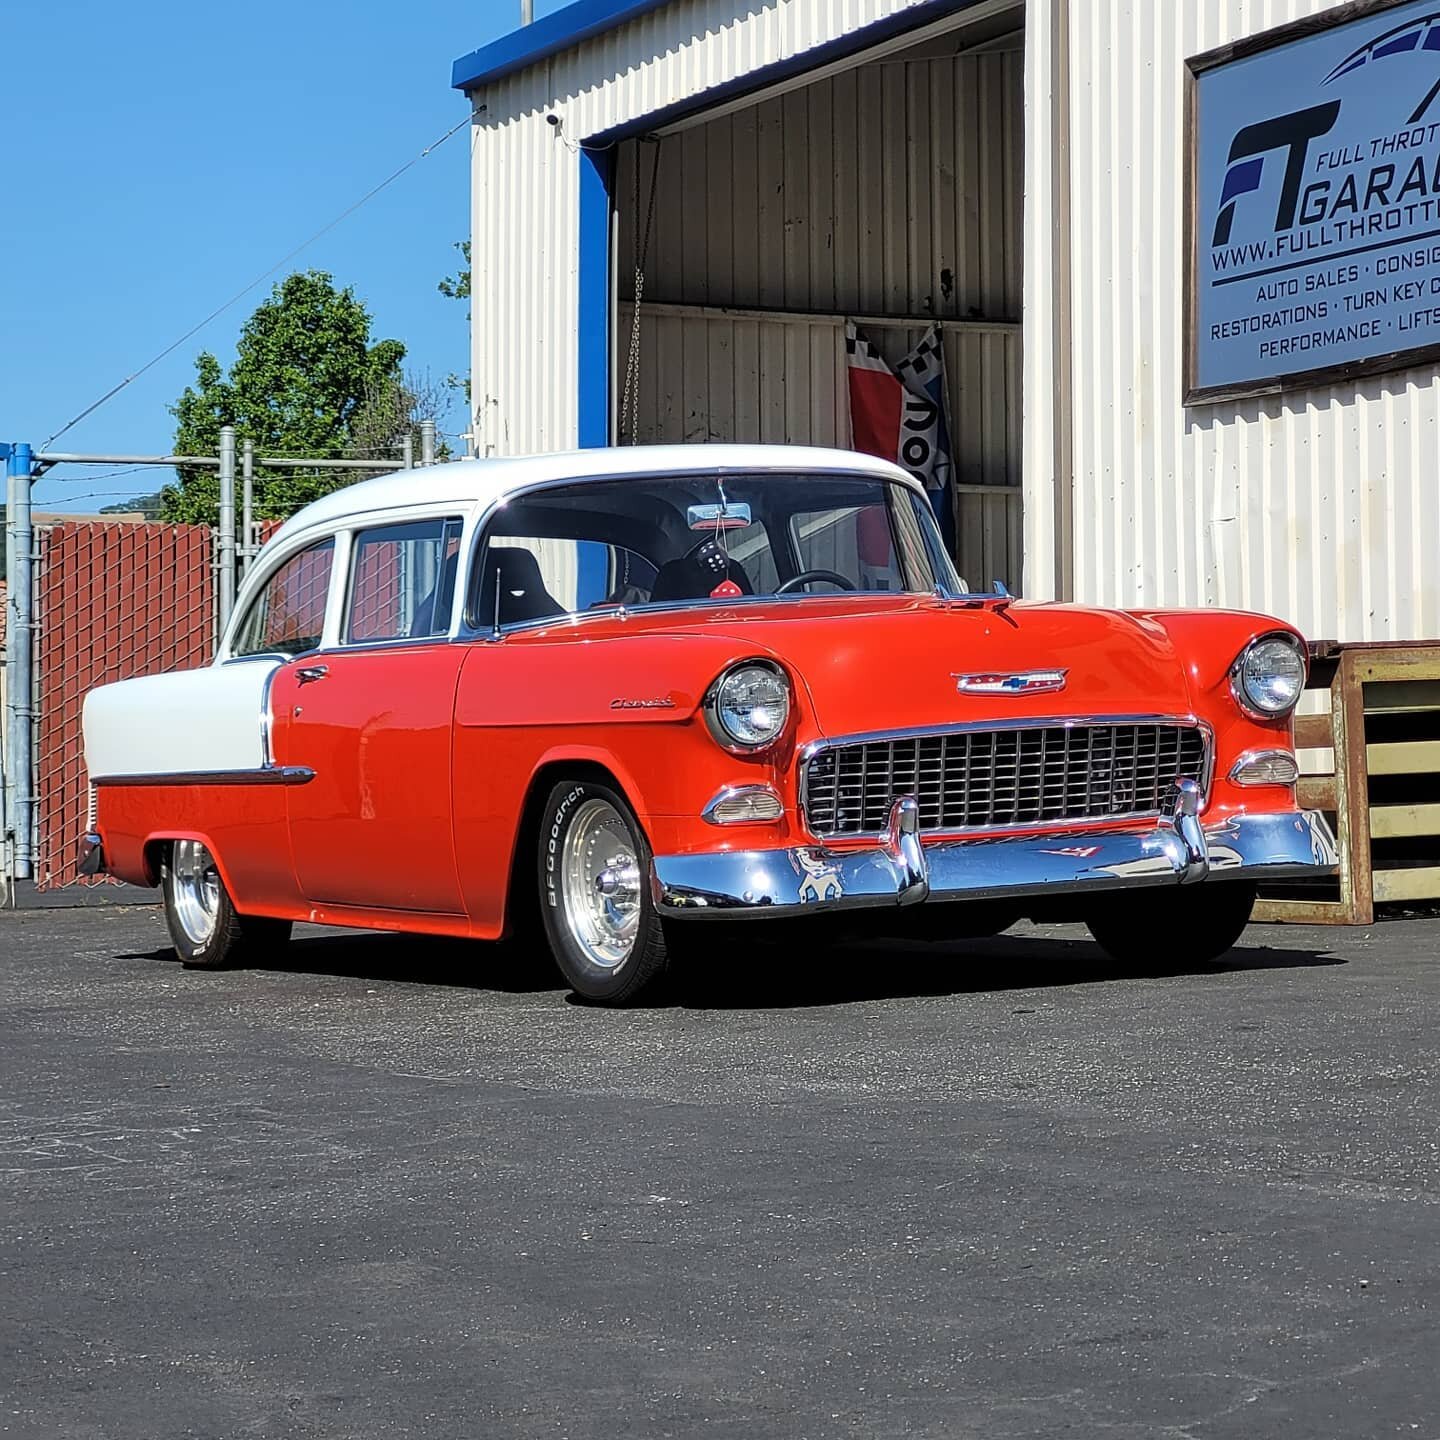 Always a good day when a gorgeous Tri-Five comes in for a stroker engine swap! This 1955 Chevrolet 2 door 210 Post was rescued from a junkyard when the client was in high-school. Check out the custom backspaced Centreline wheels and pristine 30 year 